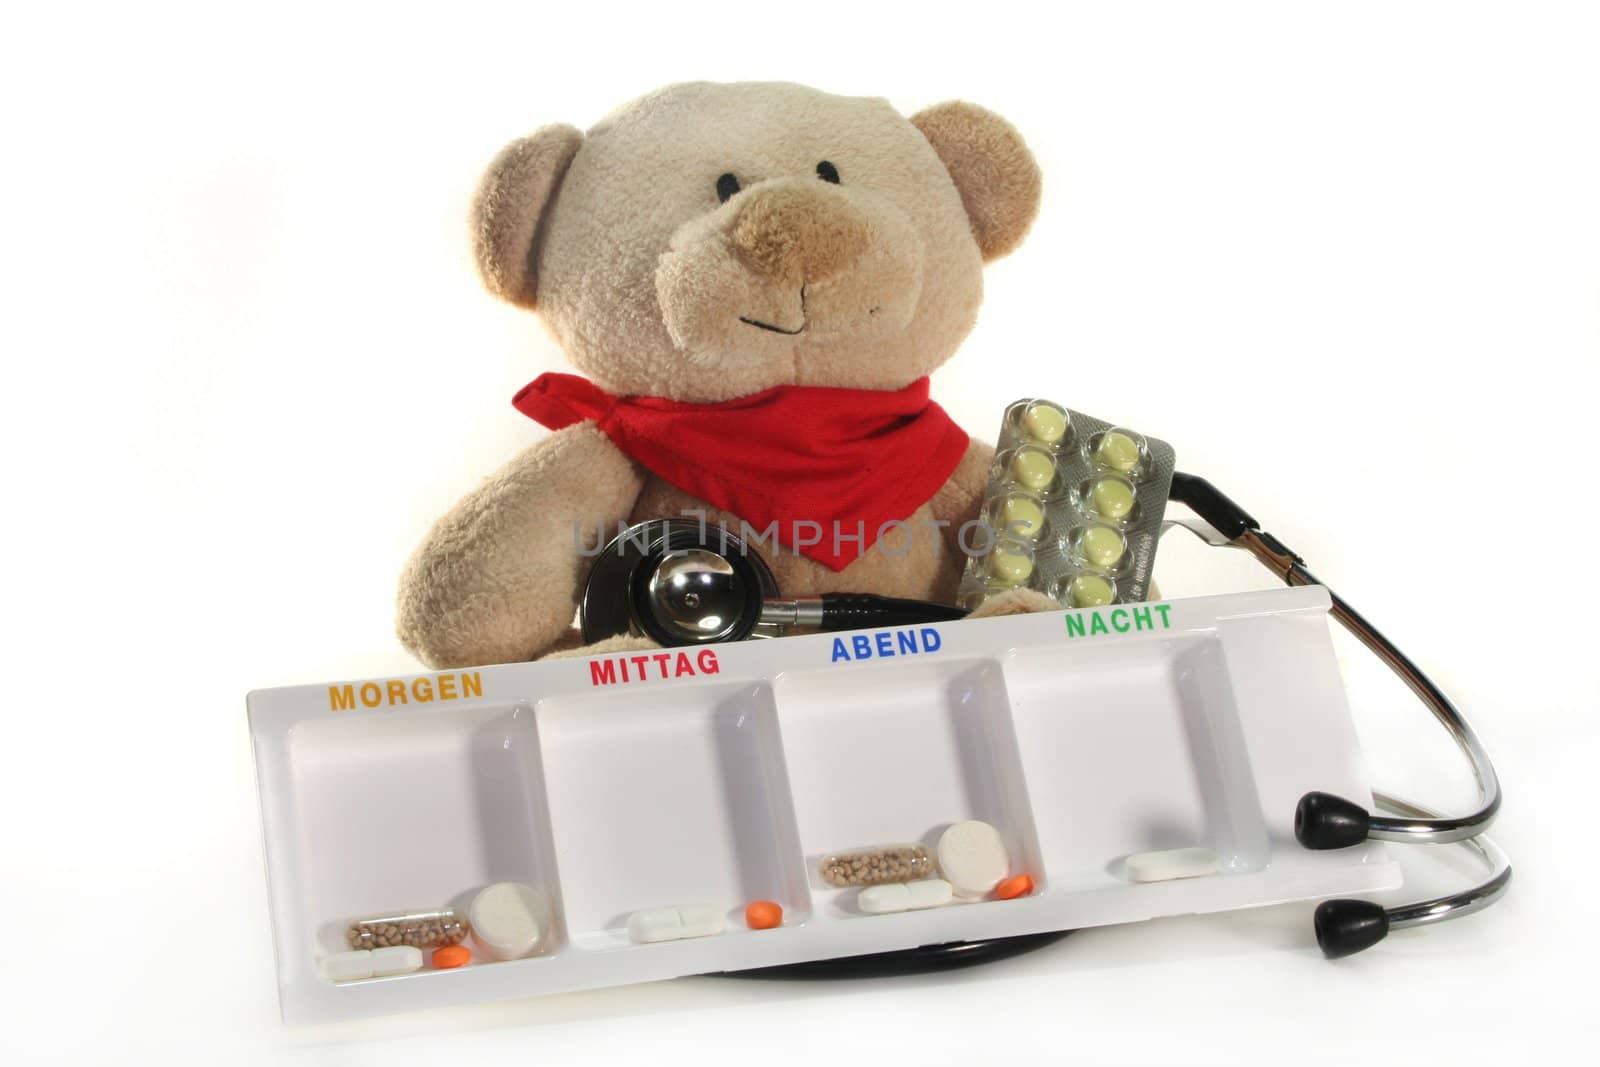 Teddy with a stethoscope and medication before a white background